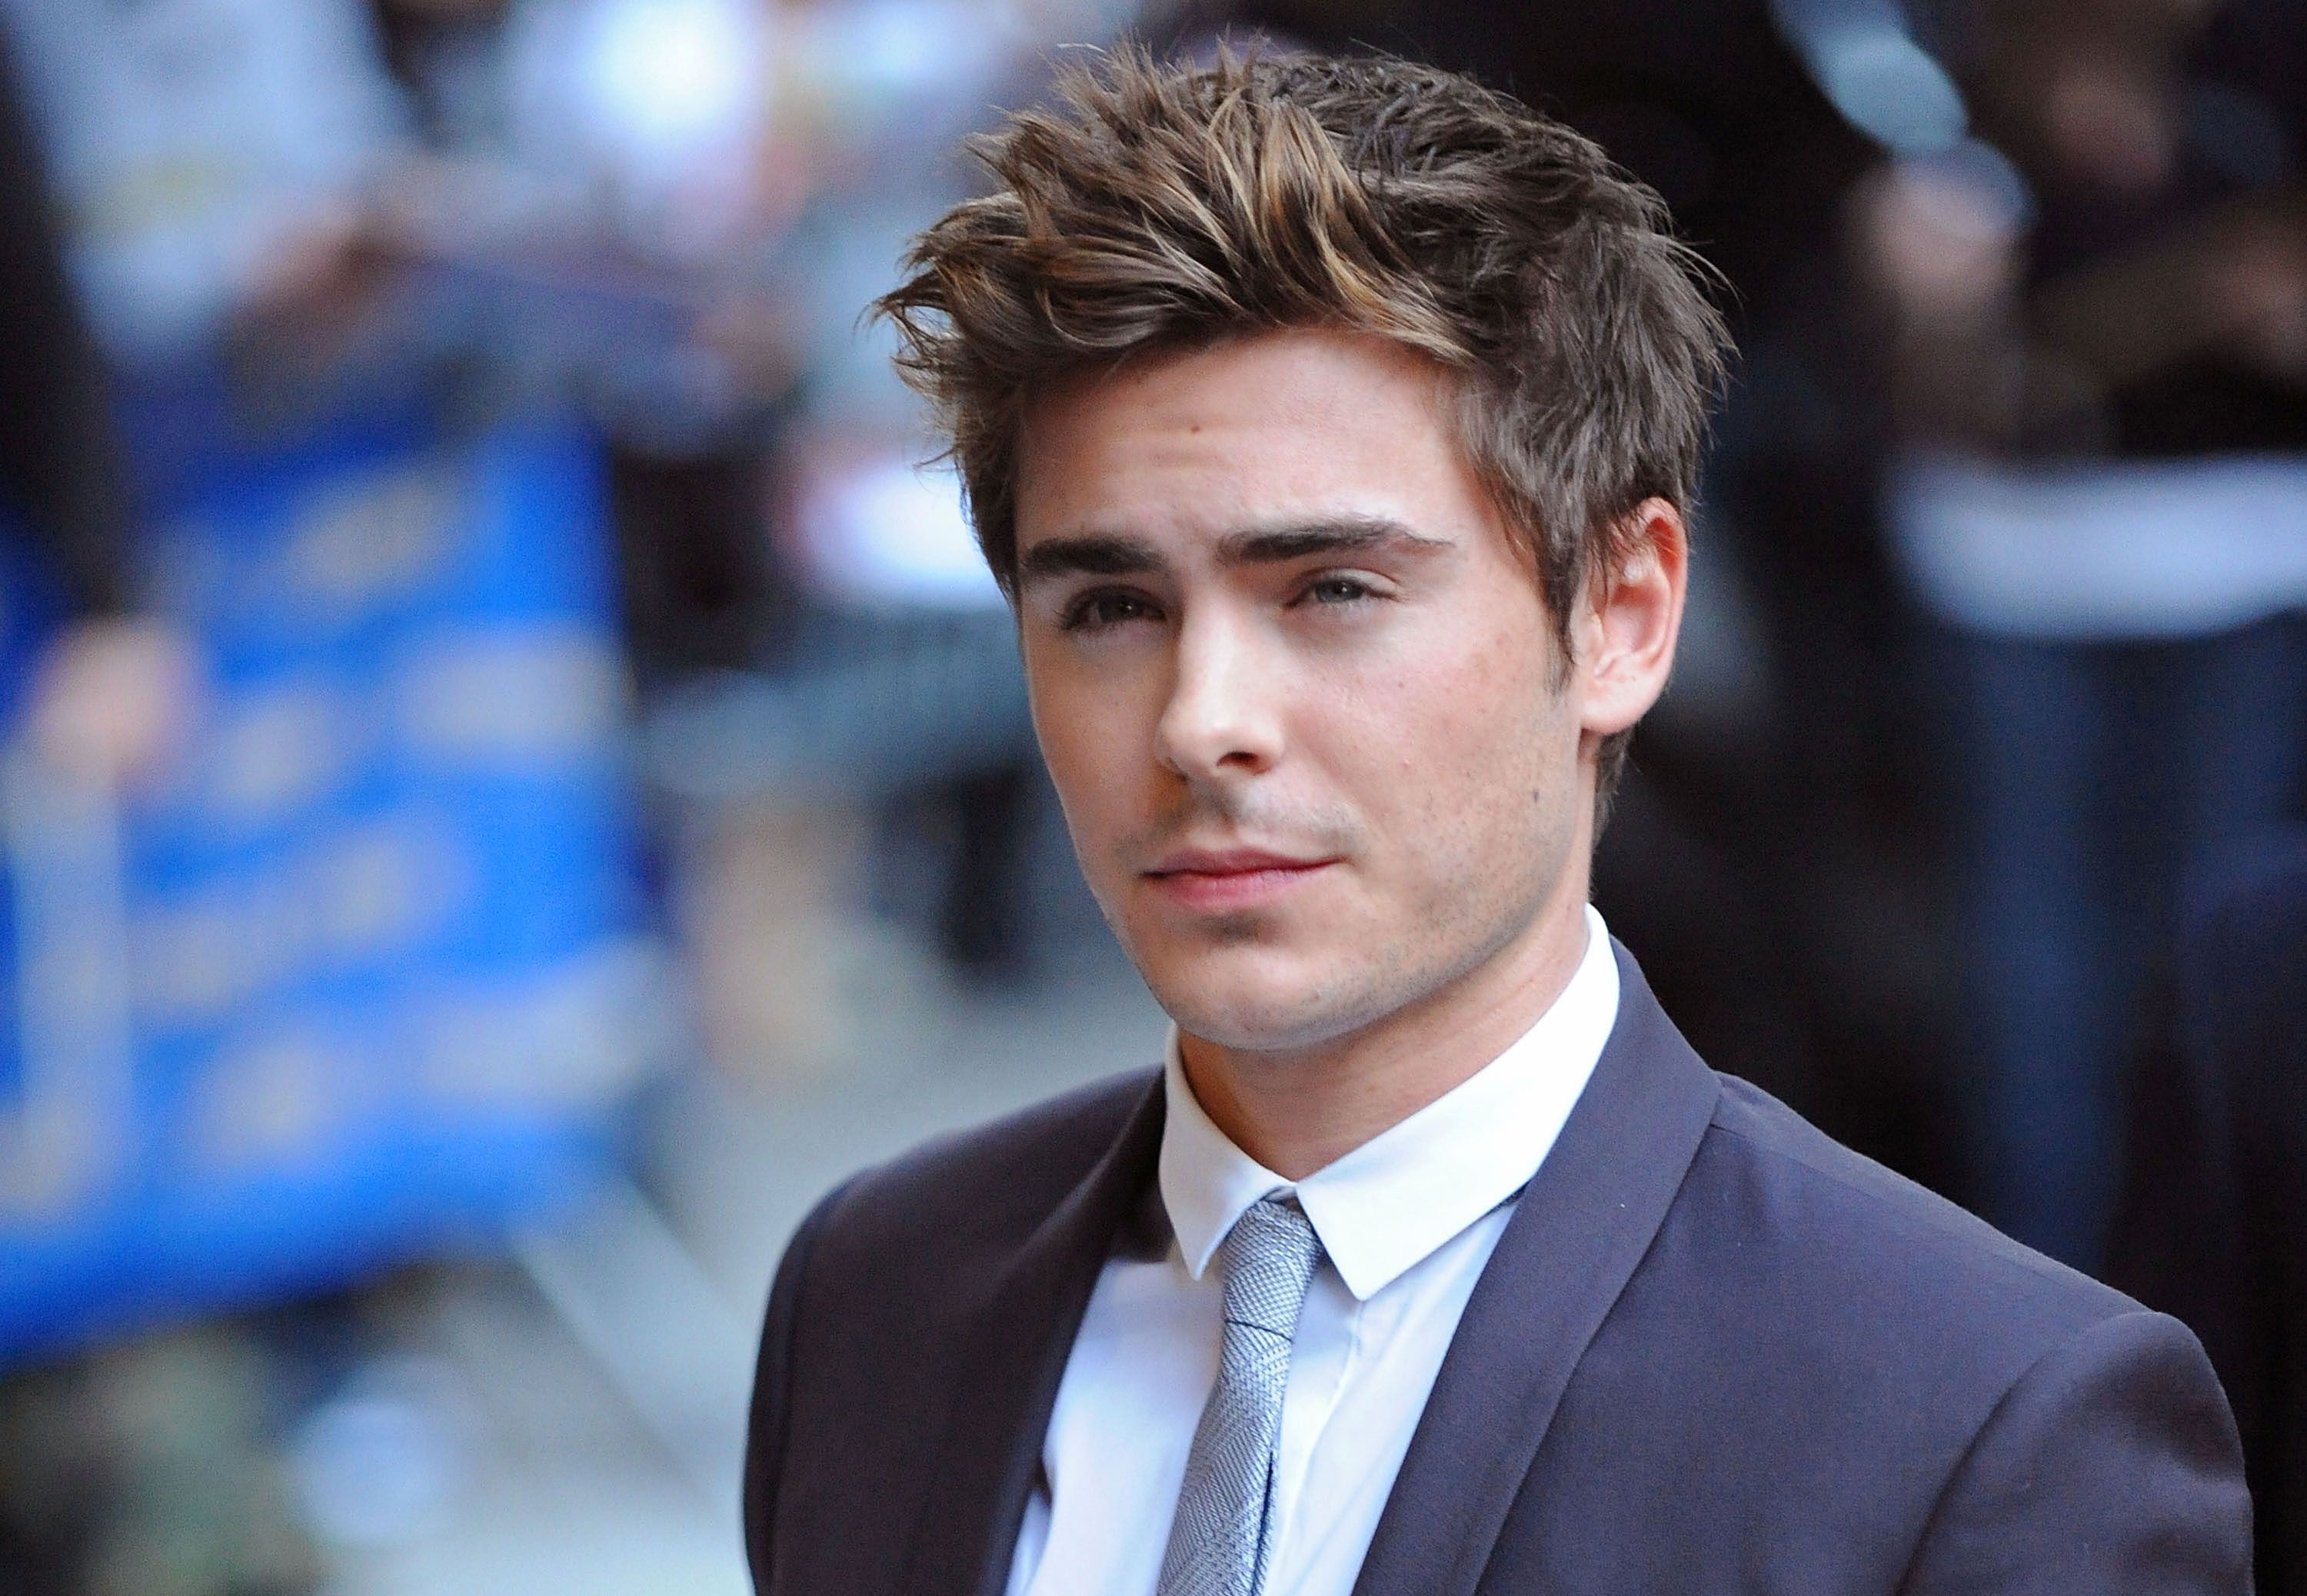 Zac Efron is unrecognizable with beefed up physique, bowl haircut